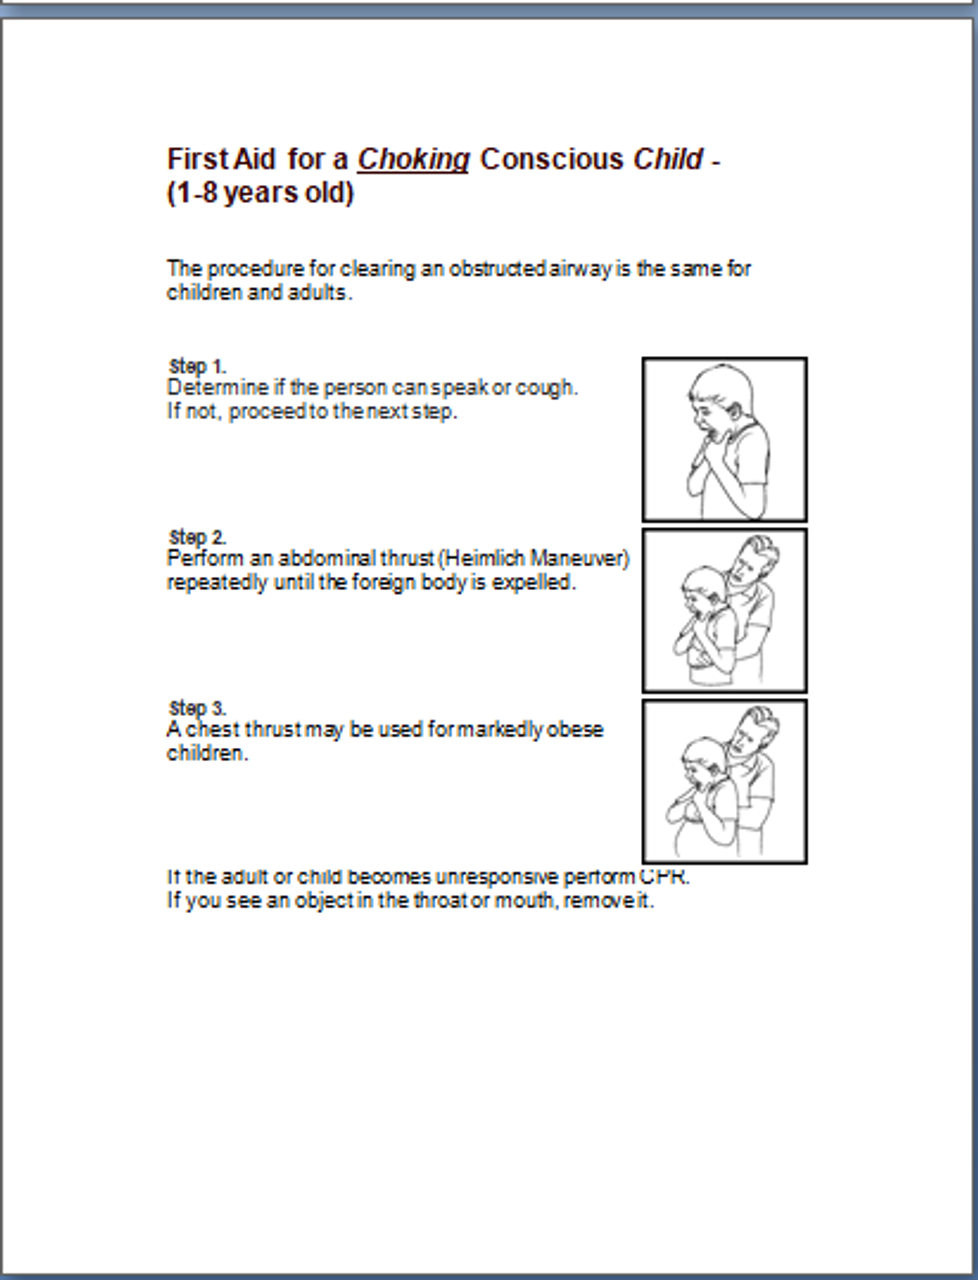 CPR-instructions, images and pocket guides